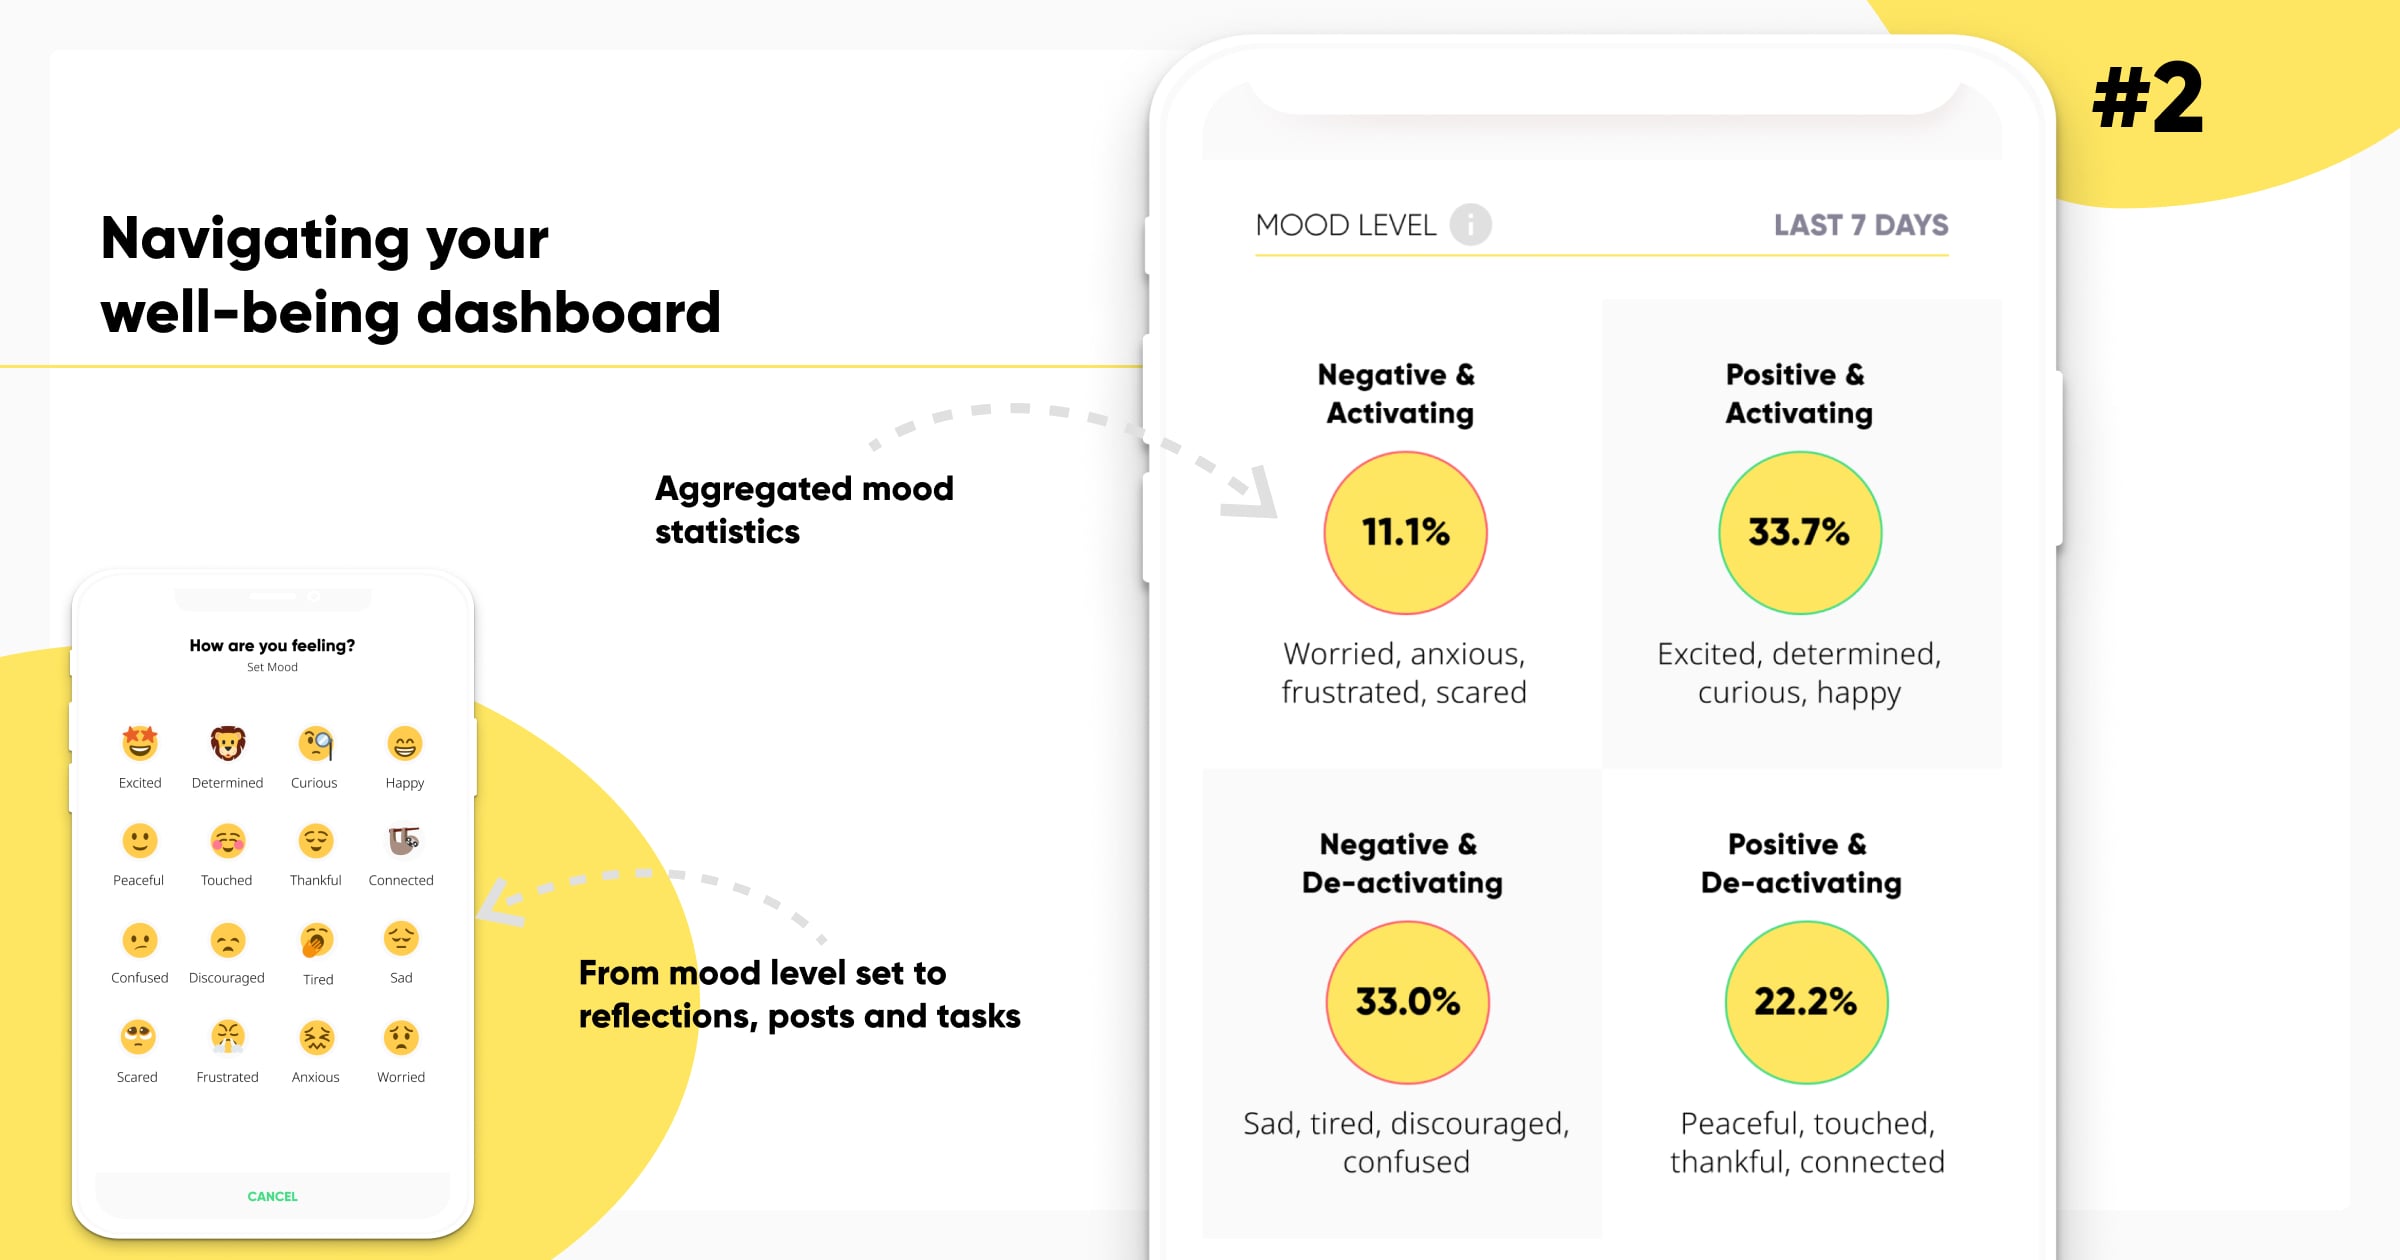 Navigating-your-well-being-dashboard-2school-application